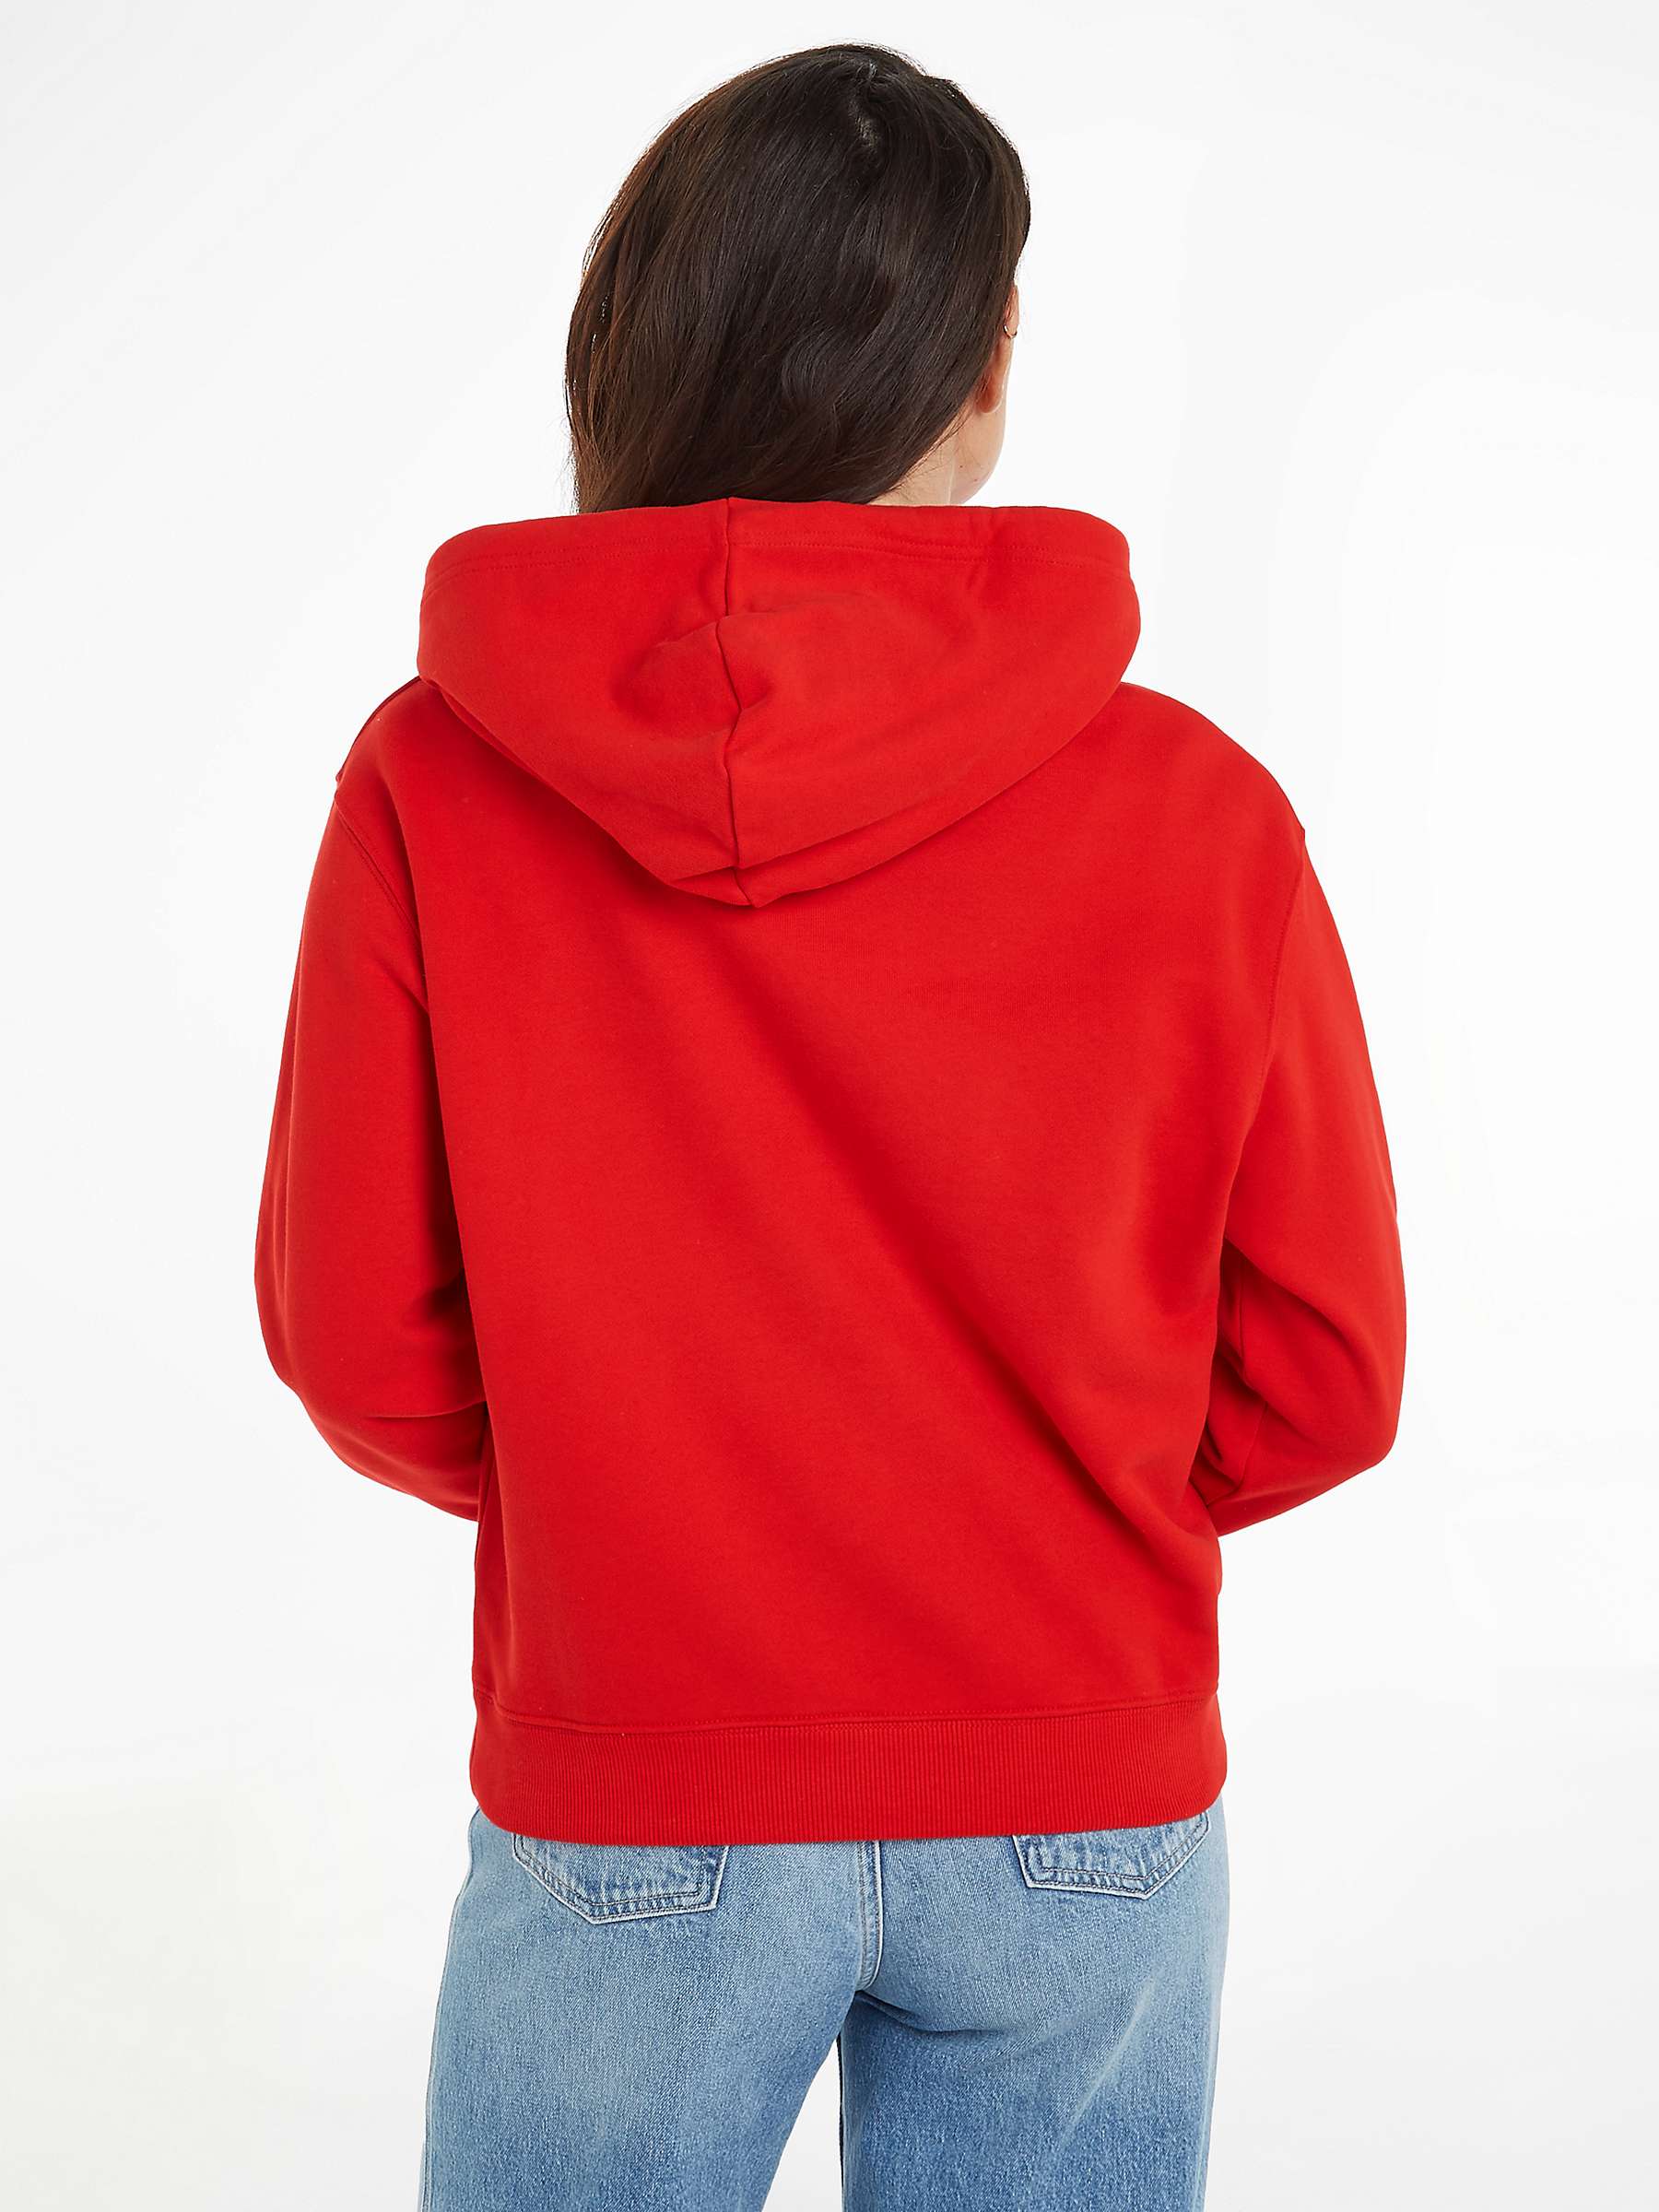 Buy Tommy Hilfiger Relaxed Fit Hoodie, Red Online at johnlewis.com